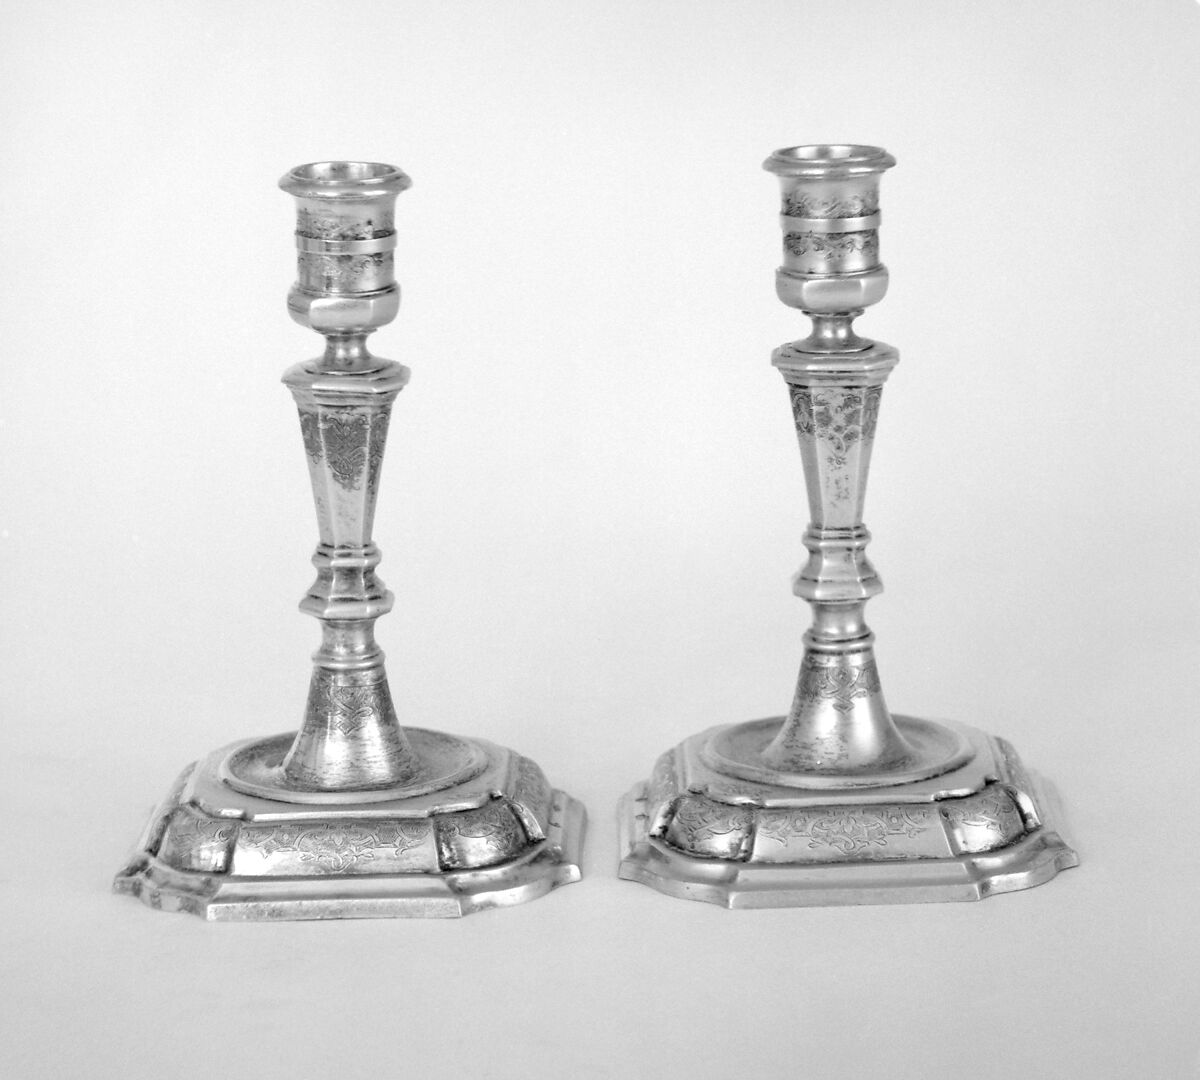 Candlestick (one of a pair) (part of a set), Silver gilt, German, Augsburg 